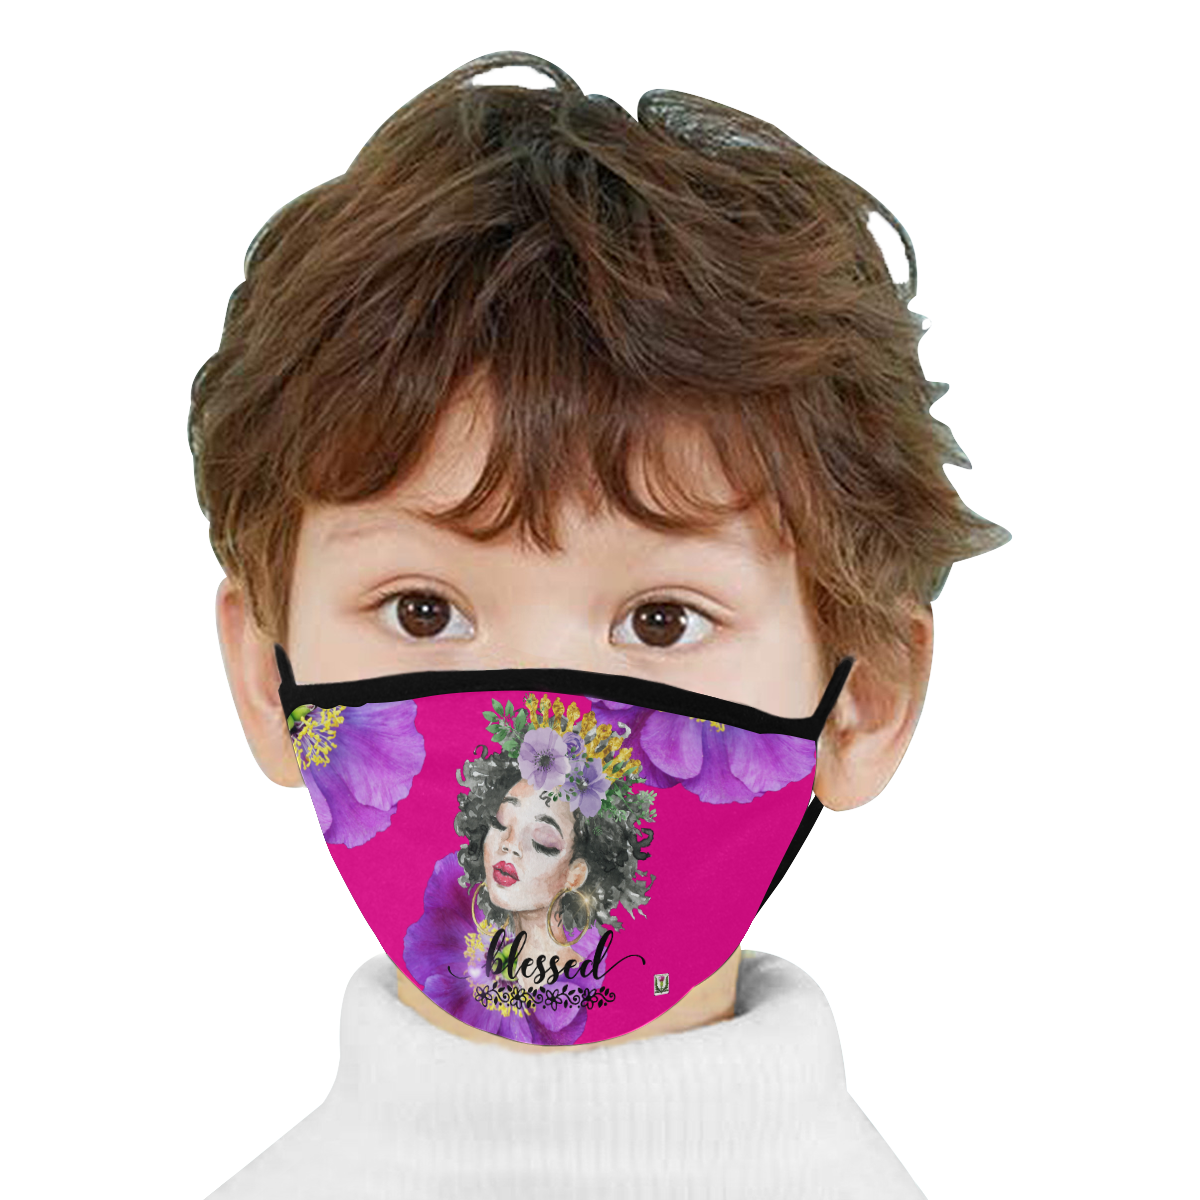 Fairlings Delight's The Word Collection- Blessed 53086a12 Mouth Mask